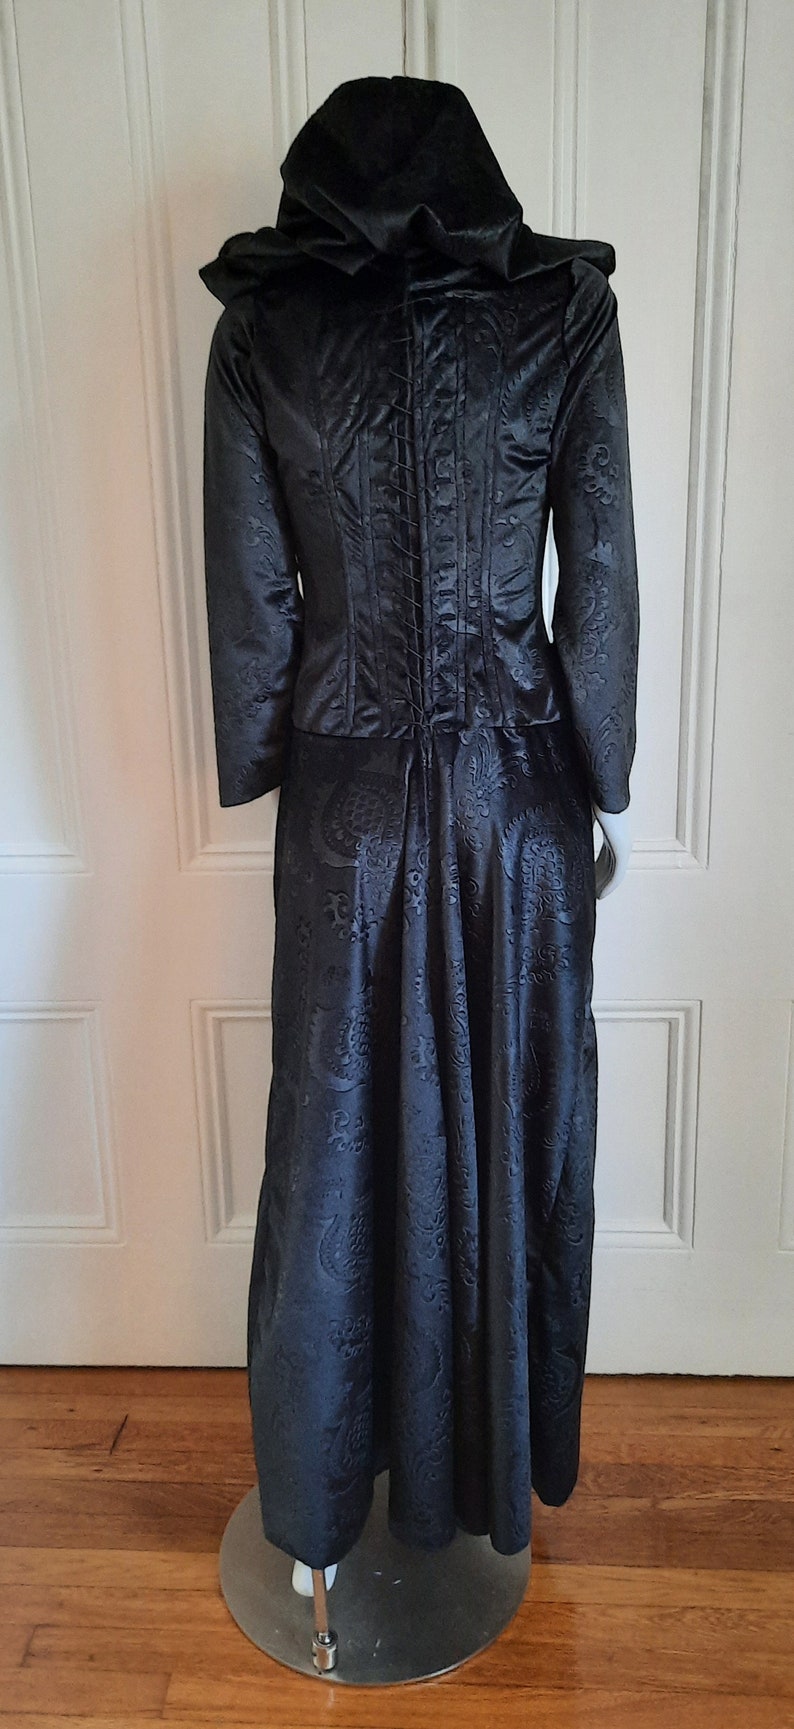 Lady Dimitrescu Daughter Inspired Cosplay Costume Bela - Etsy